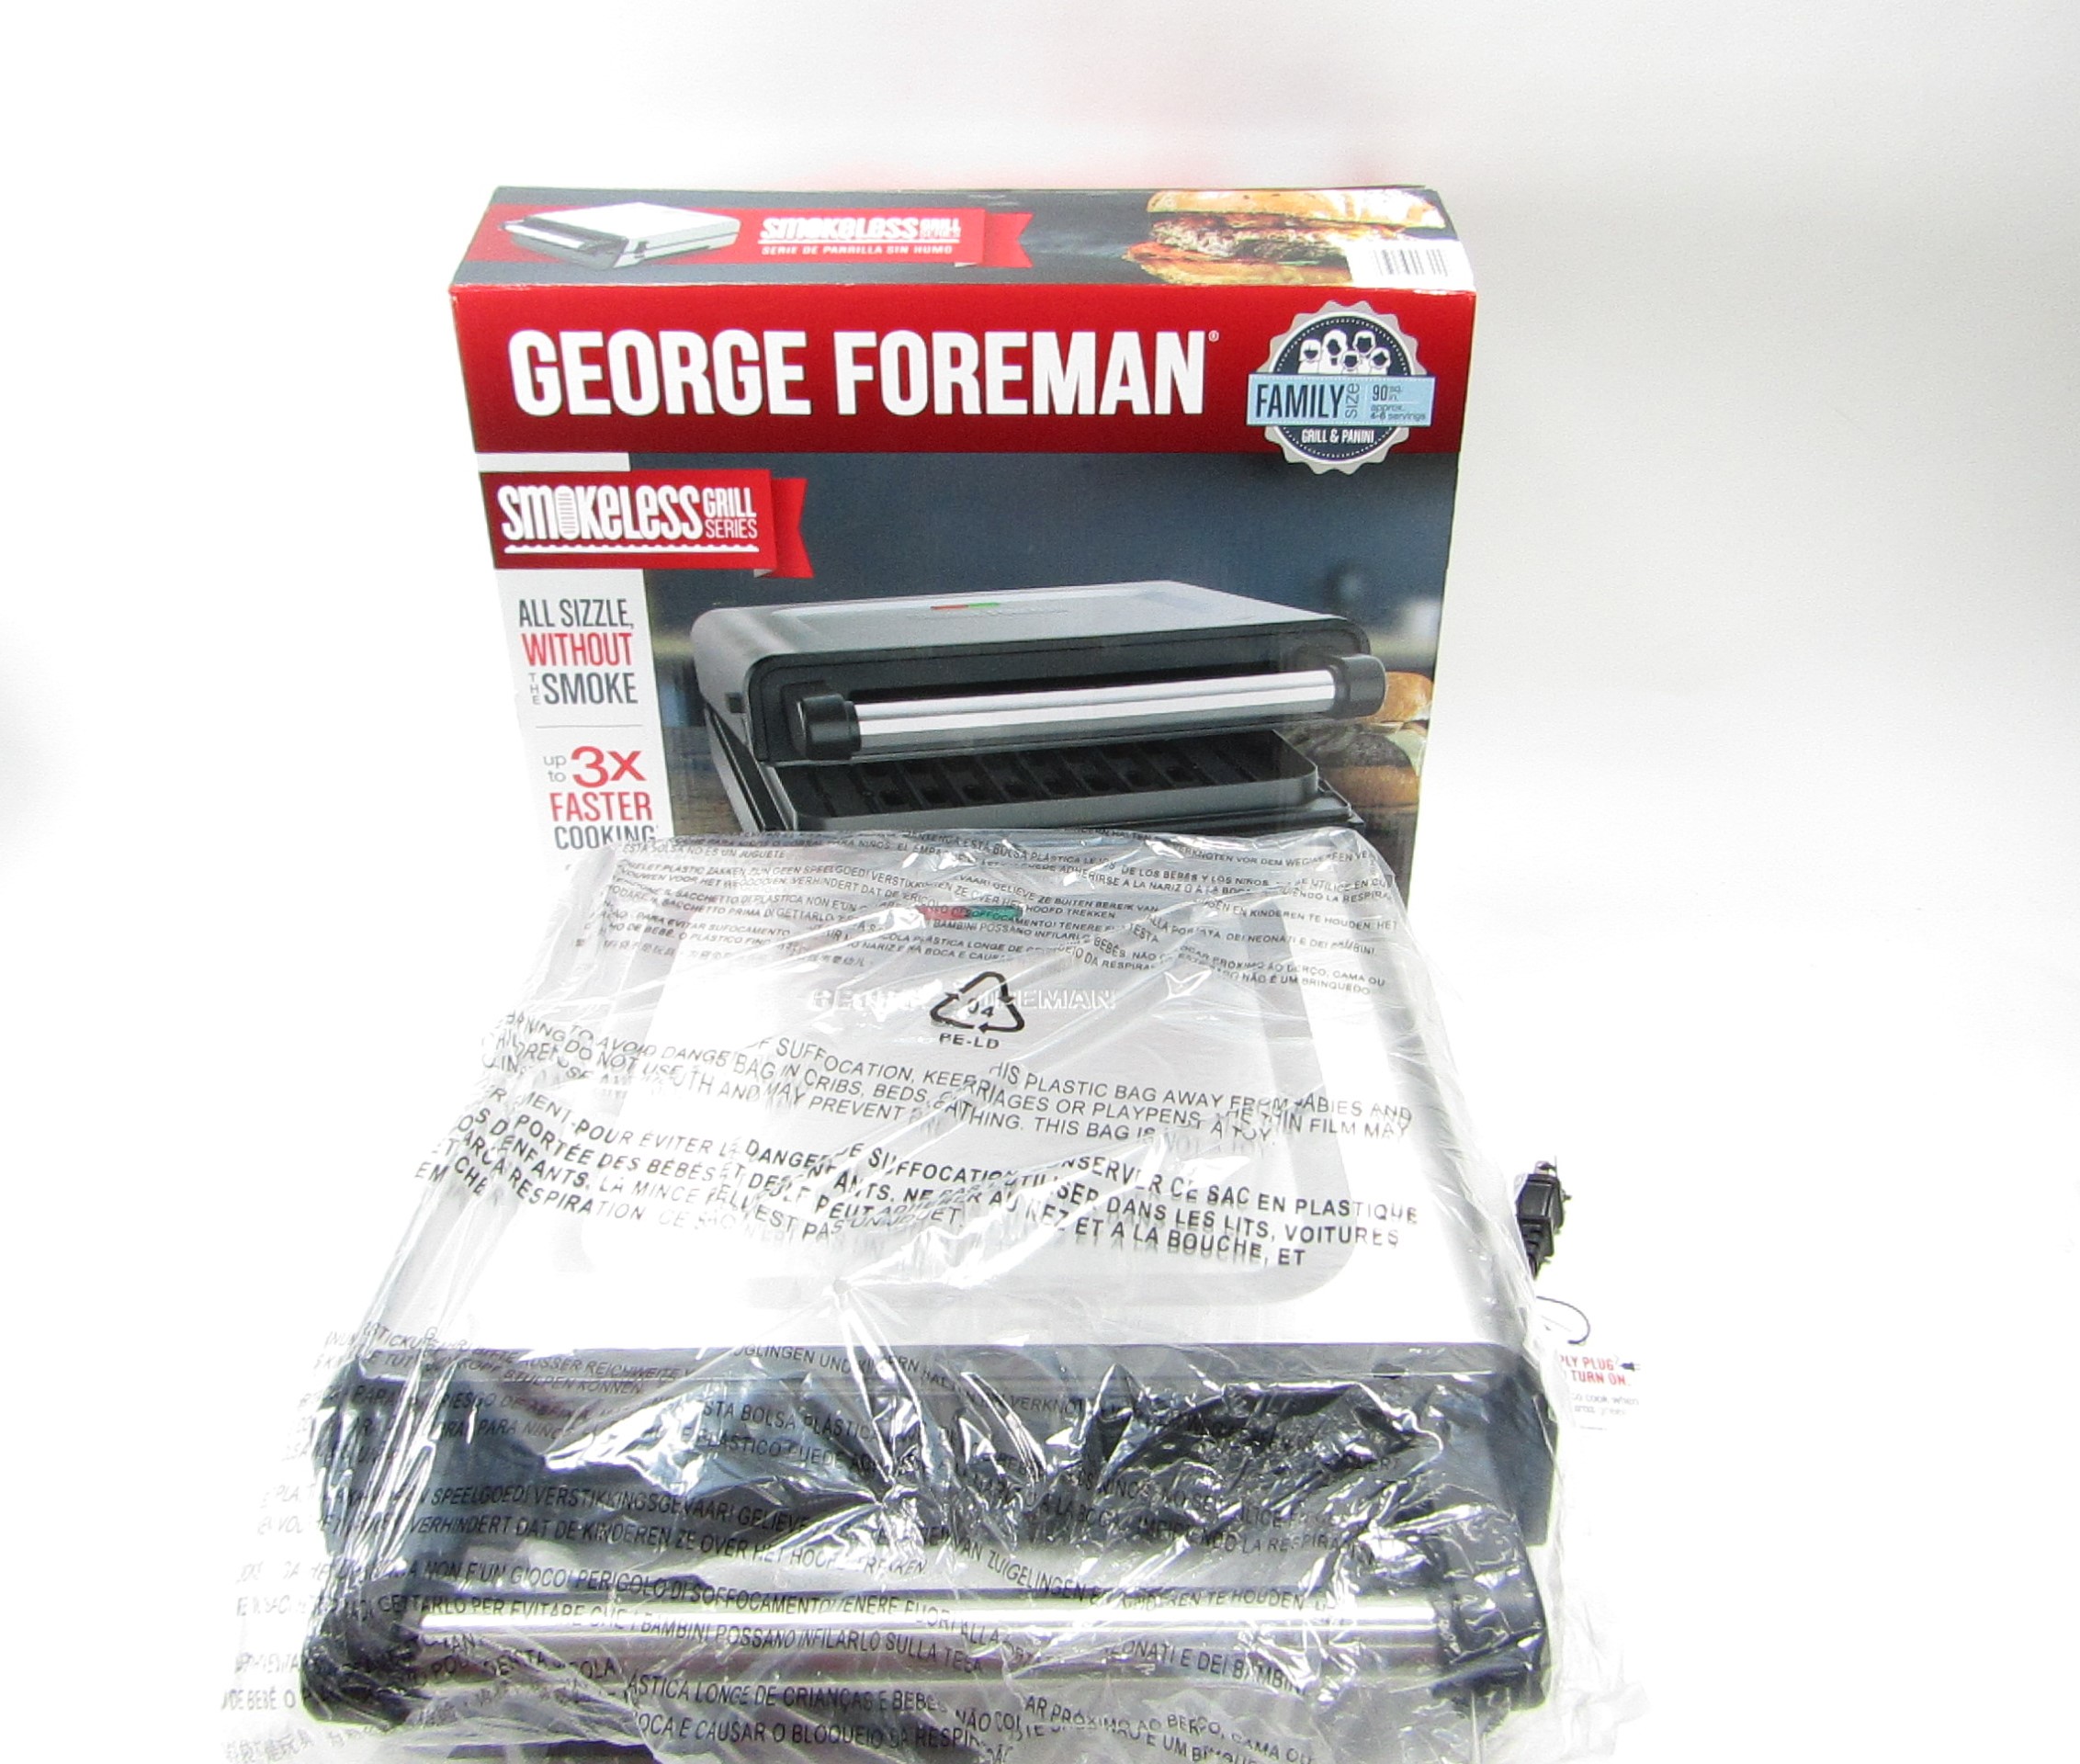 George Foreman Smokeless Grill Series Family Size 90 Sq. In Grill / Panini